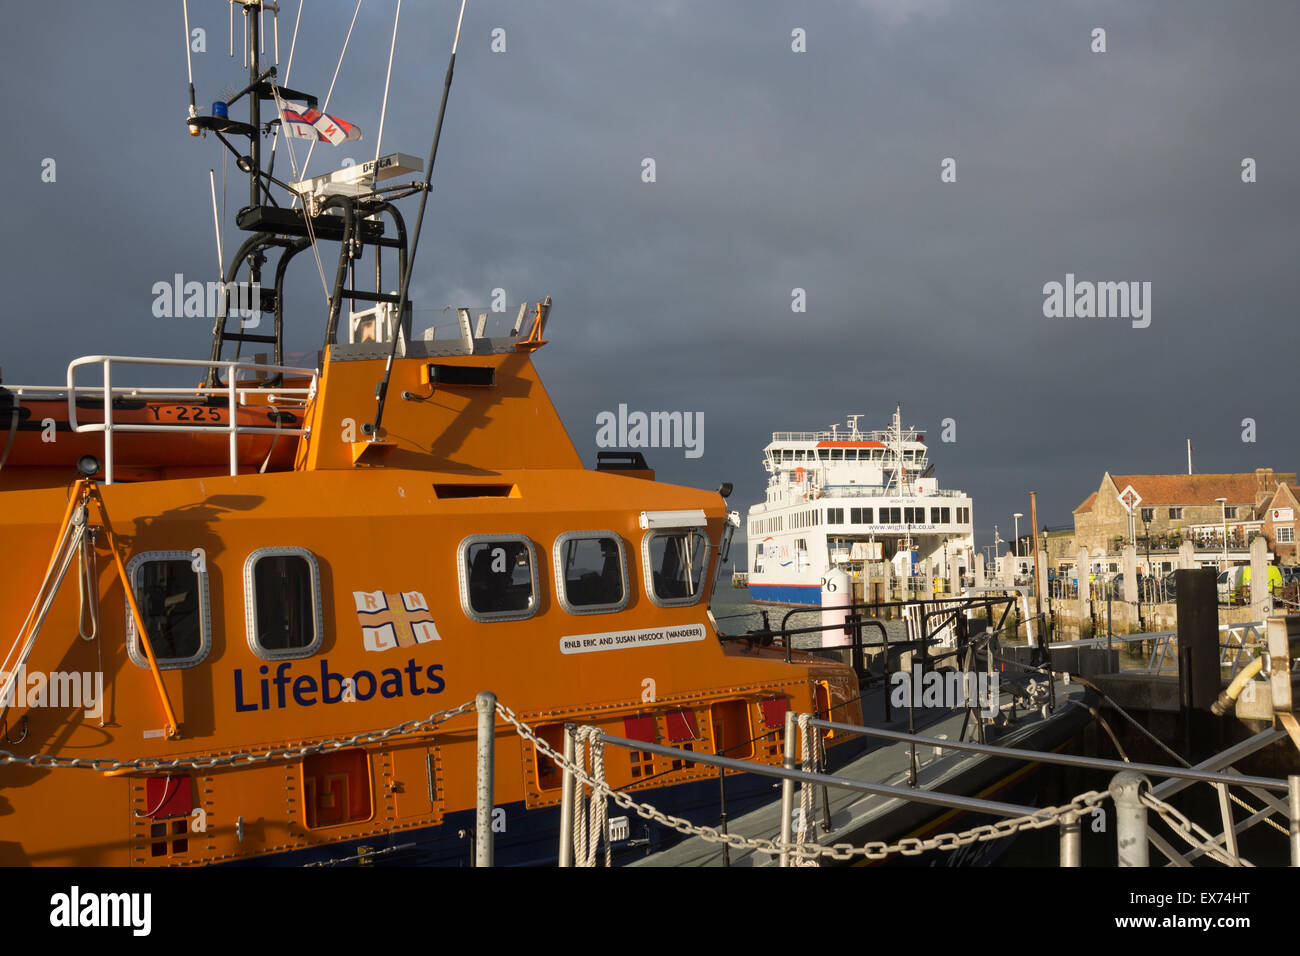 A RNLI (Royal National Lifeboat Institution) lifeboat and sea ferry at Yarmouth Terminal Jetty, Isle of Wight, UK Stock Photo